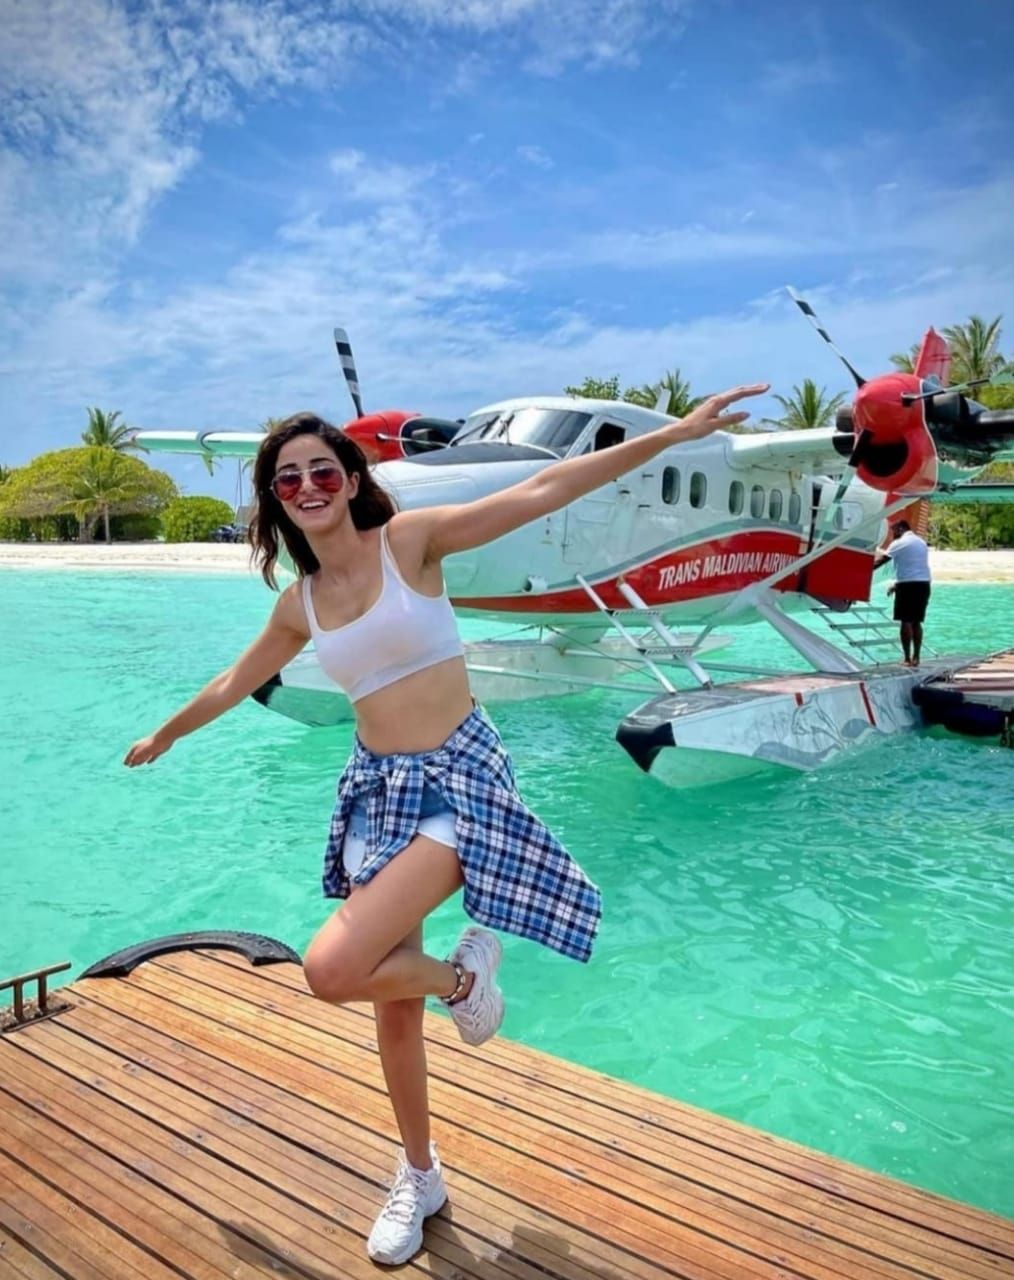 Ananya Panday shares a cute picture from her Maldives holiday; poses like a sea plane